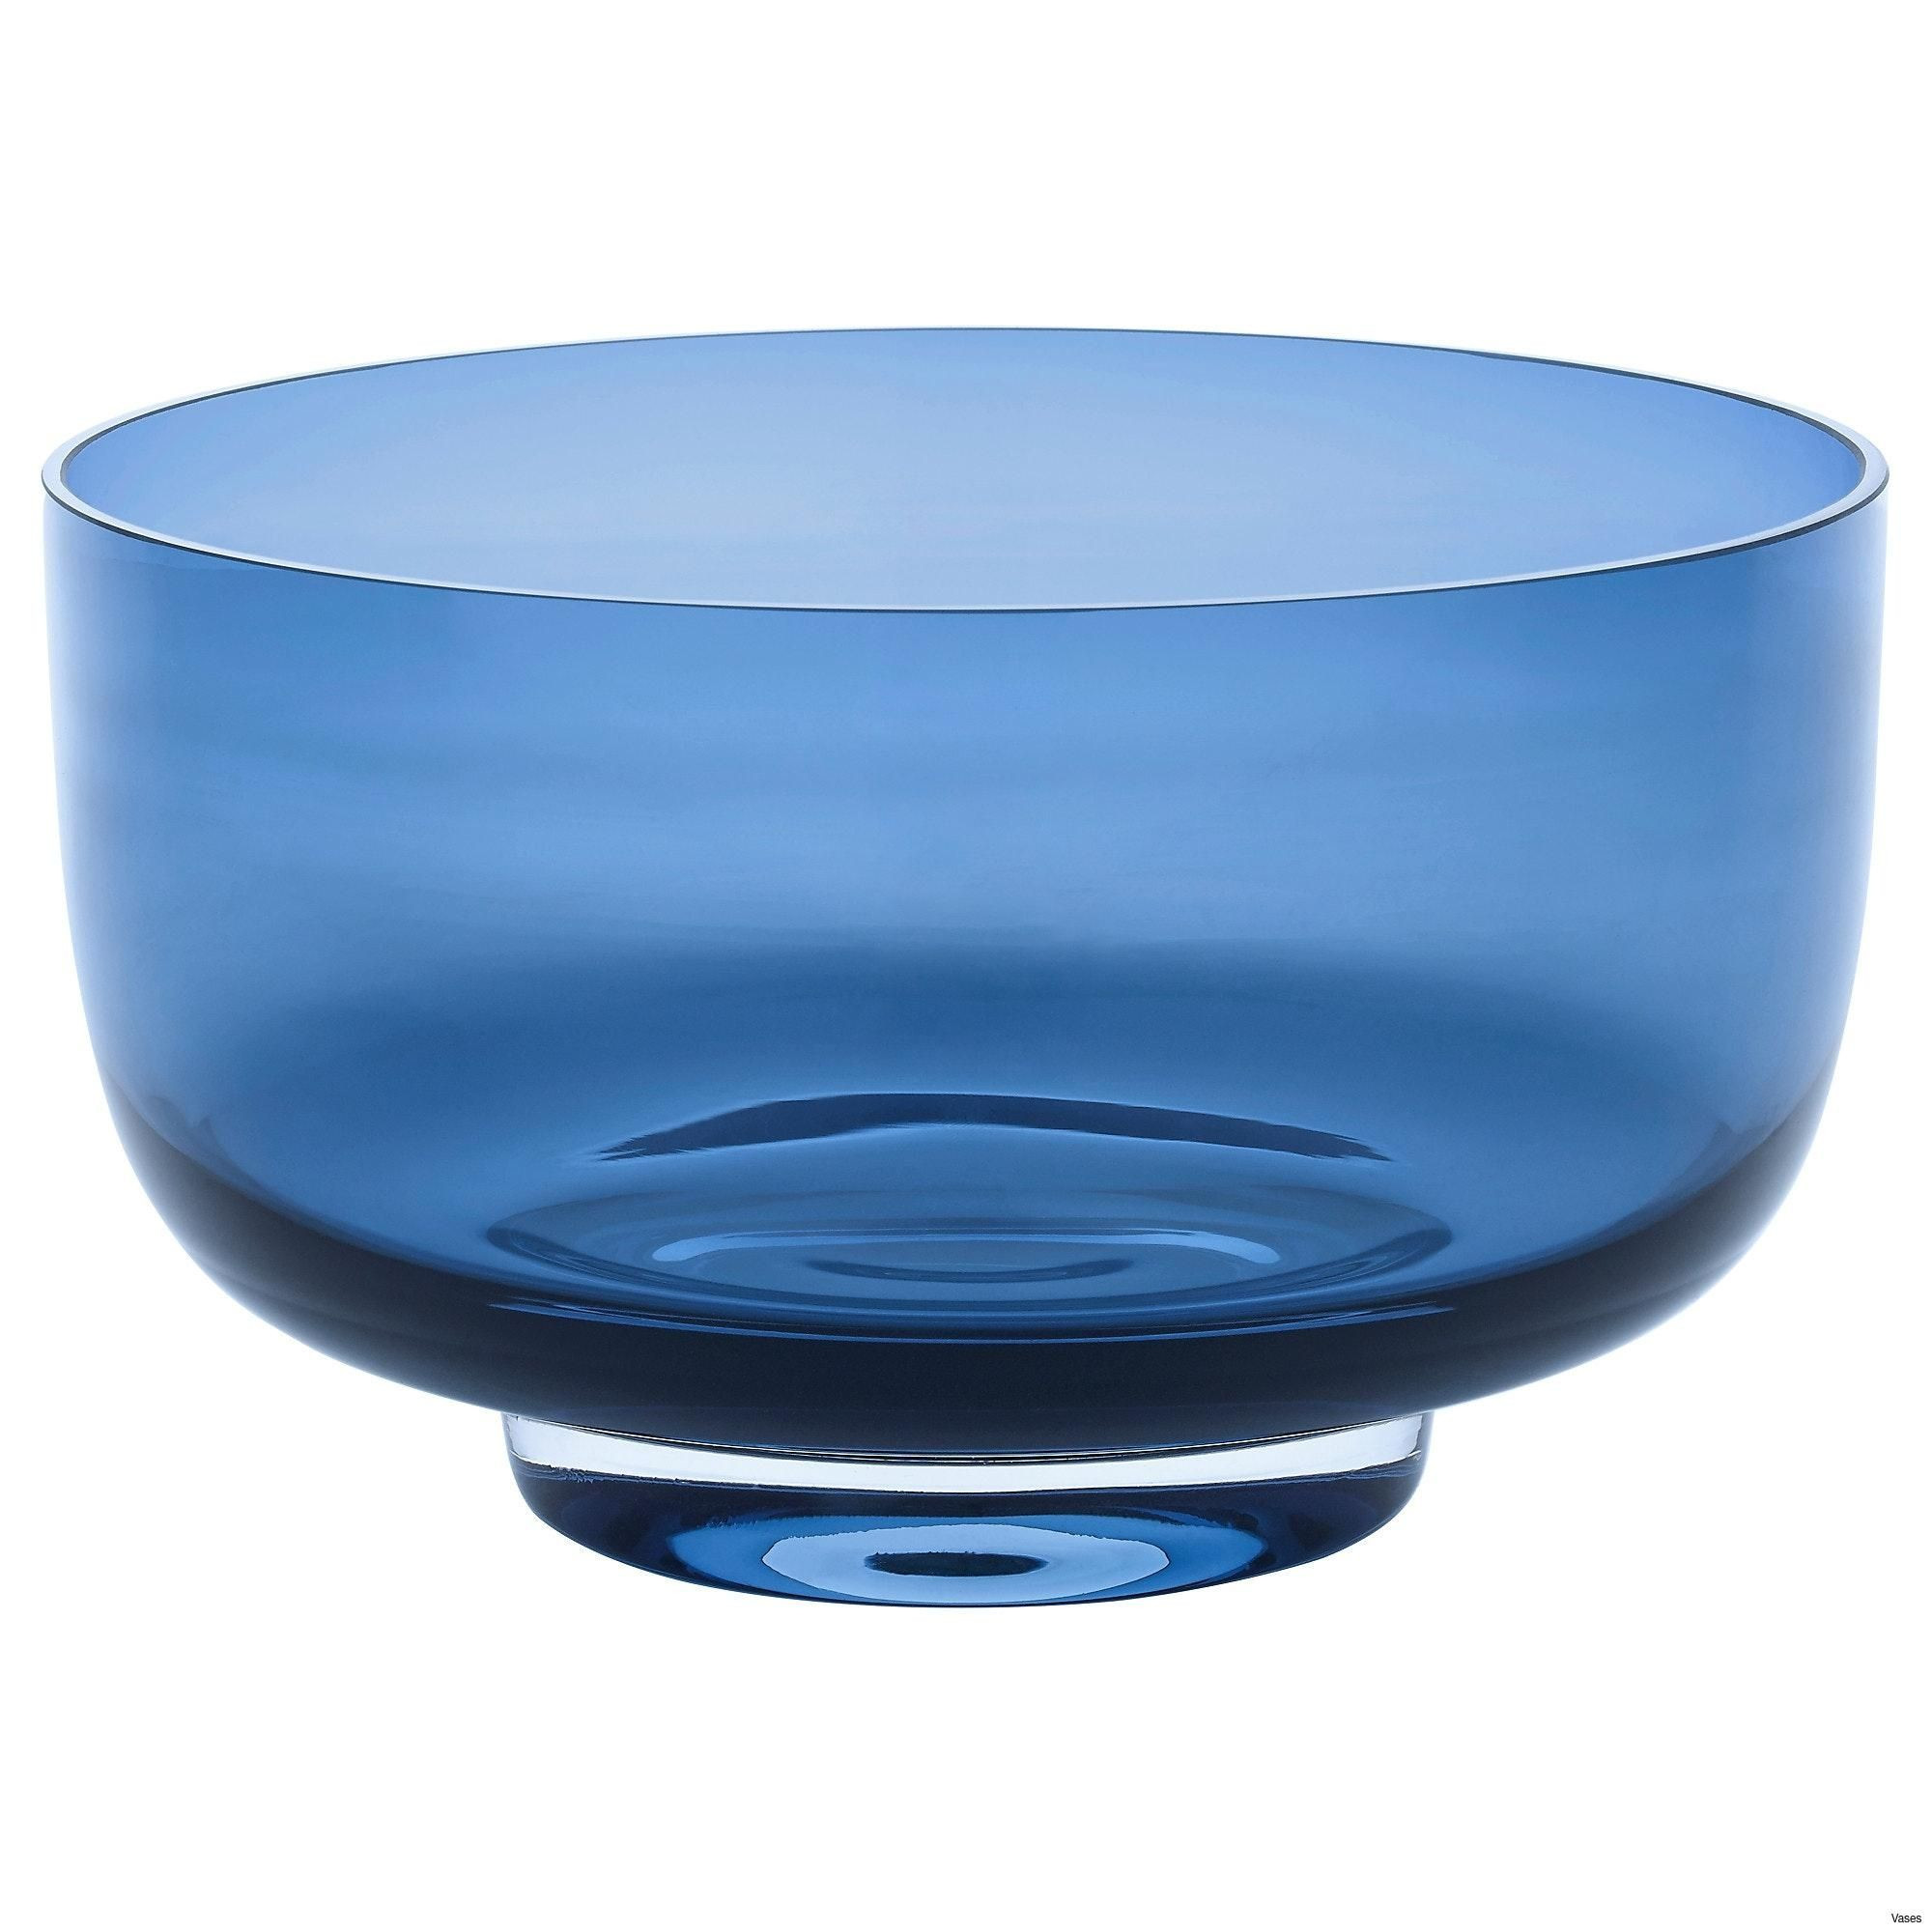 29 Awesome Art Deco Blue Vase 2024 free download art deco blue vase of 23 blue crystal vase the weekly world with regard to decorative glass bowl new living room ikea vases awesome pe s5h